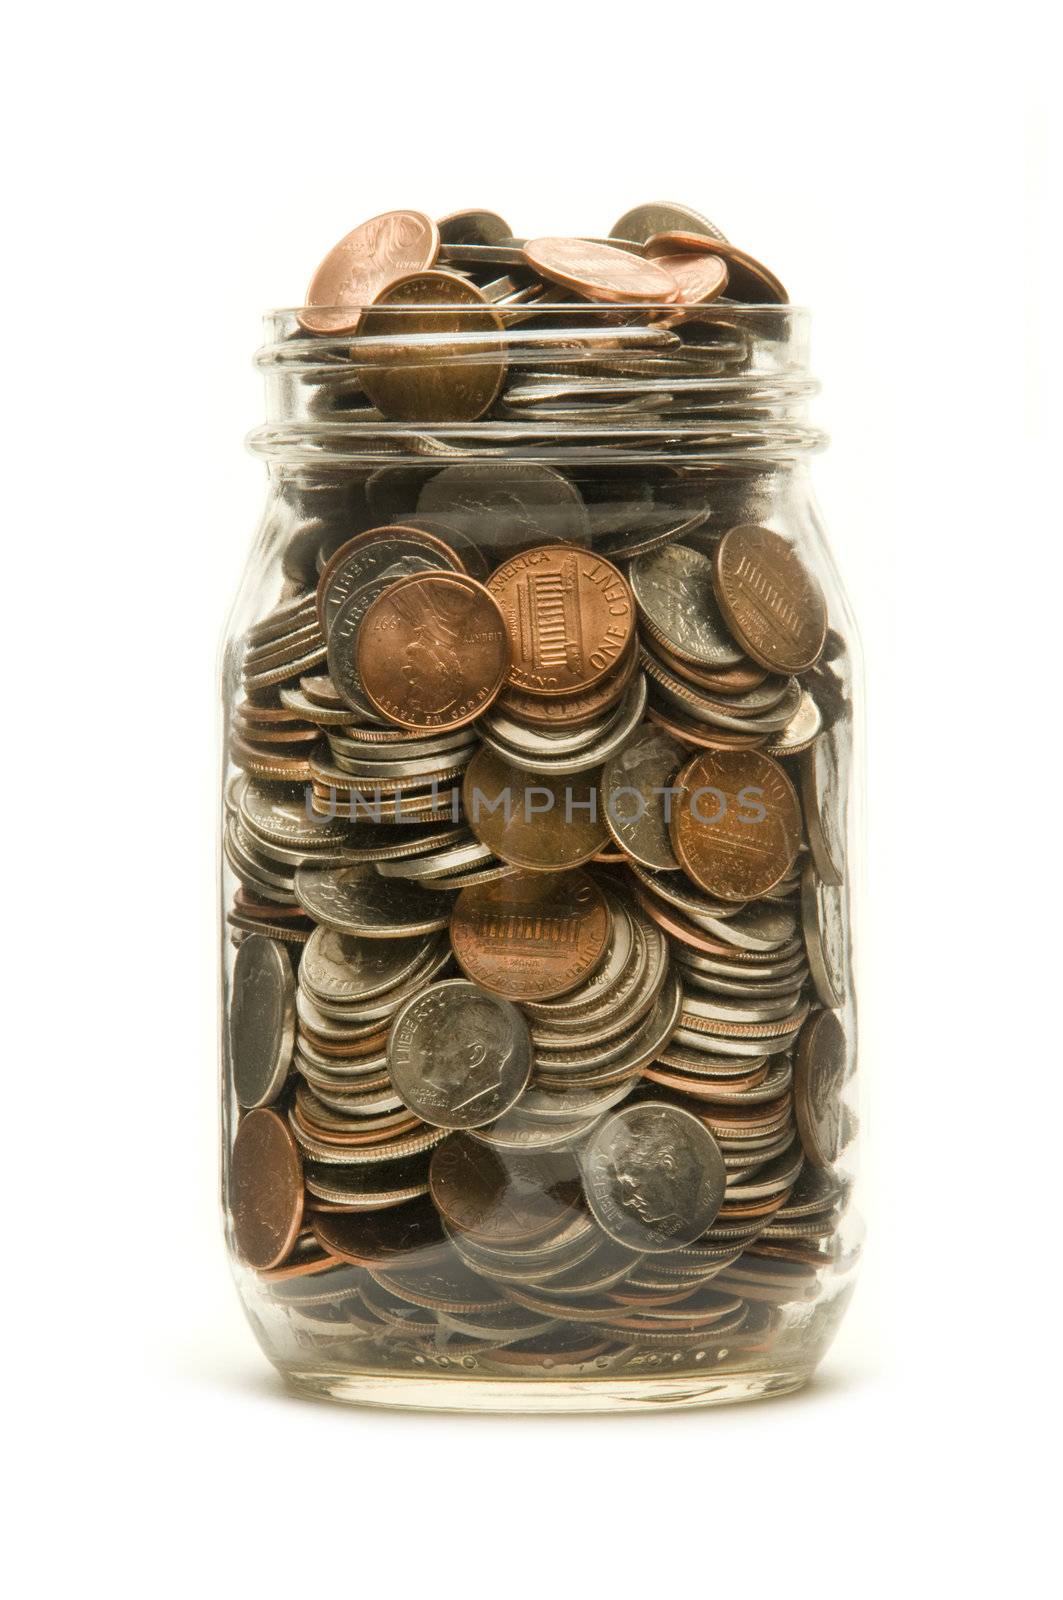 Glass jar almost overflowing with American coins against a white background